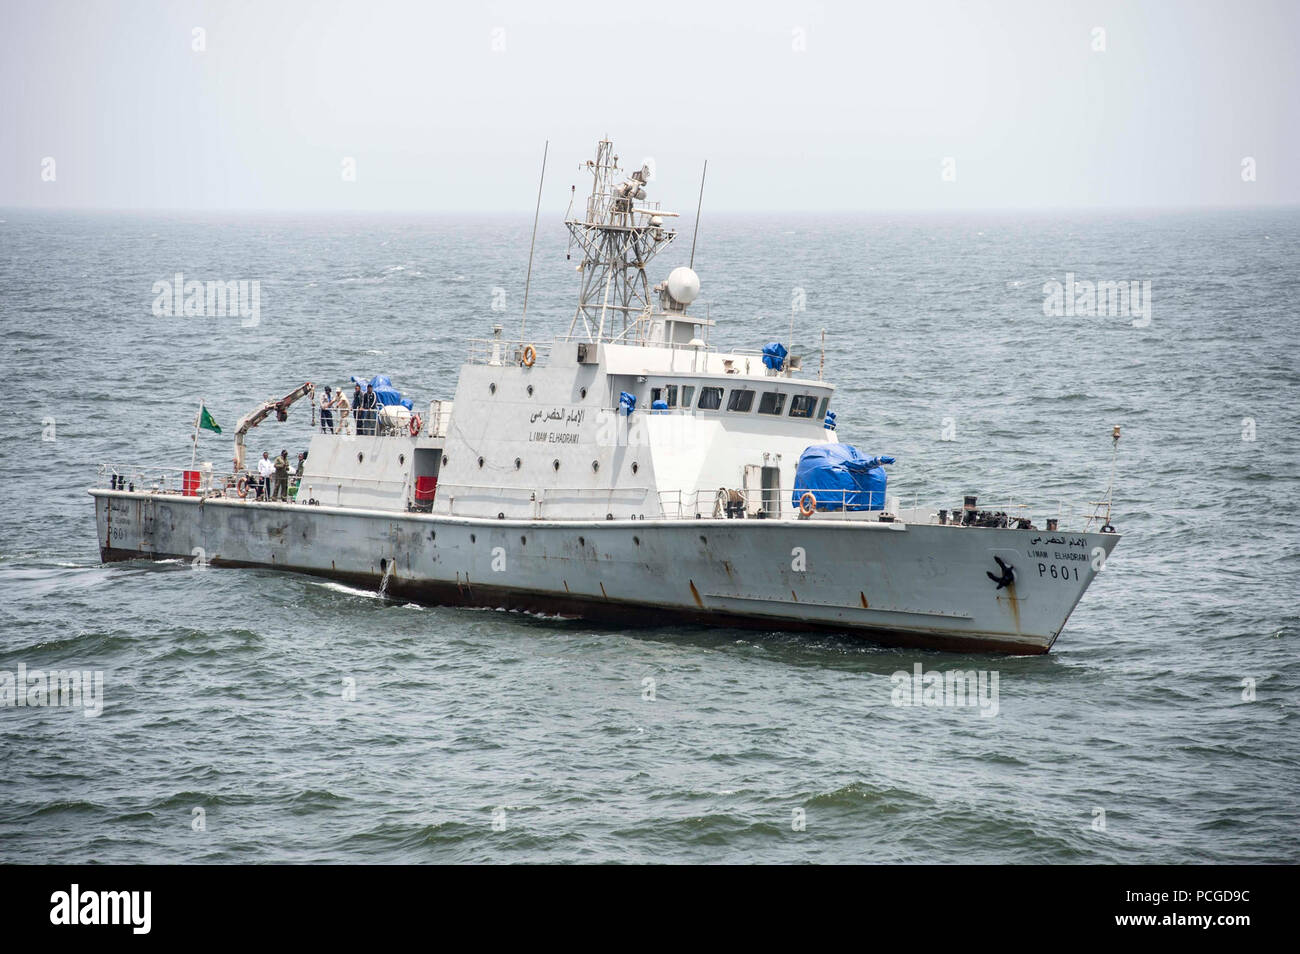 ATLANTIC OCEAN (April 22, 2015) The Mauritanian naval vessel Limam Elhadrami (P 601) patrols the Atlantic Ocean in support of Exercise Saharan Express 2015, April 22. Saharan Express is a U.S. Africa Command-sponsored multinational maritime exercise designed to increase maritime safety and security of the waters of West Africa. Stock Photo